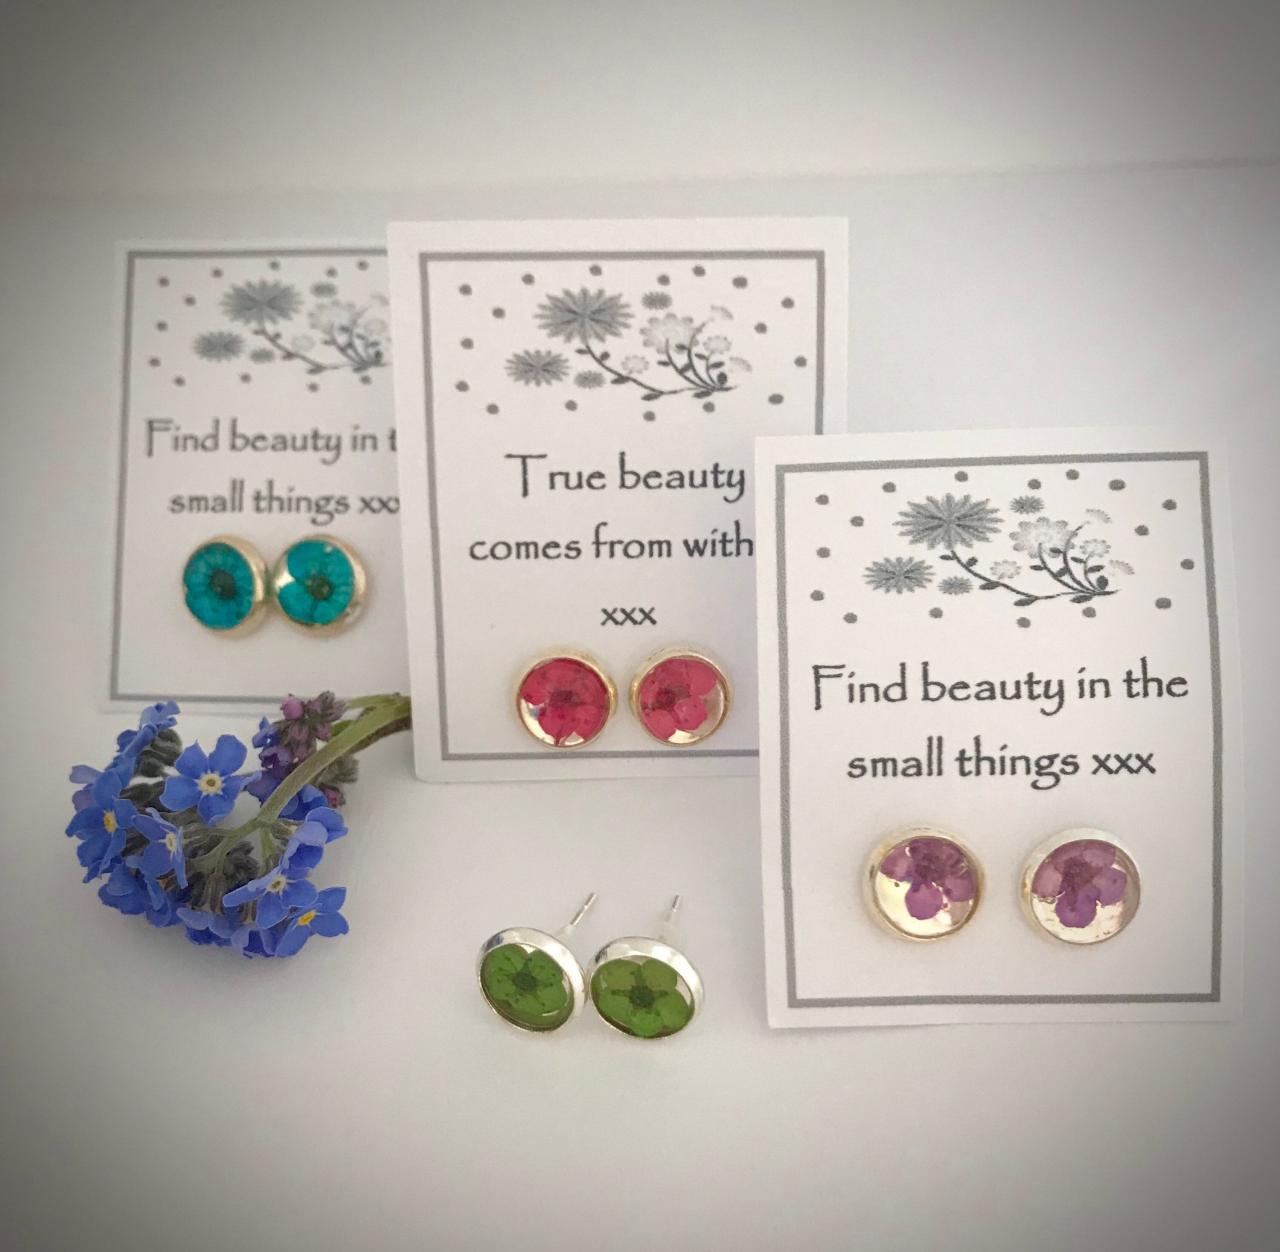 Set Of Memories Of Flowers - Dried Flower Earrings With A Beautiful Message